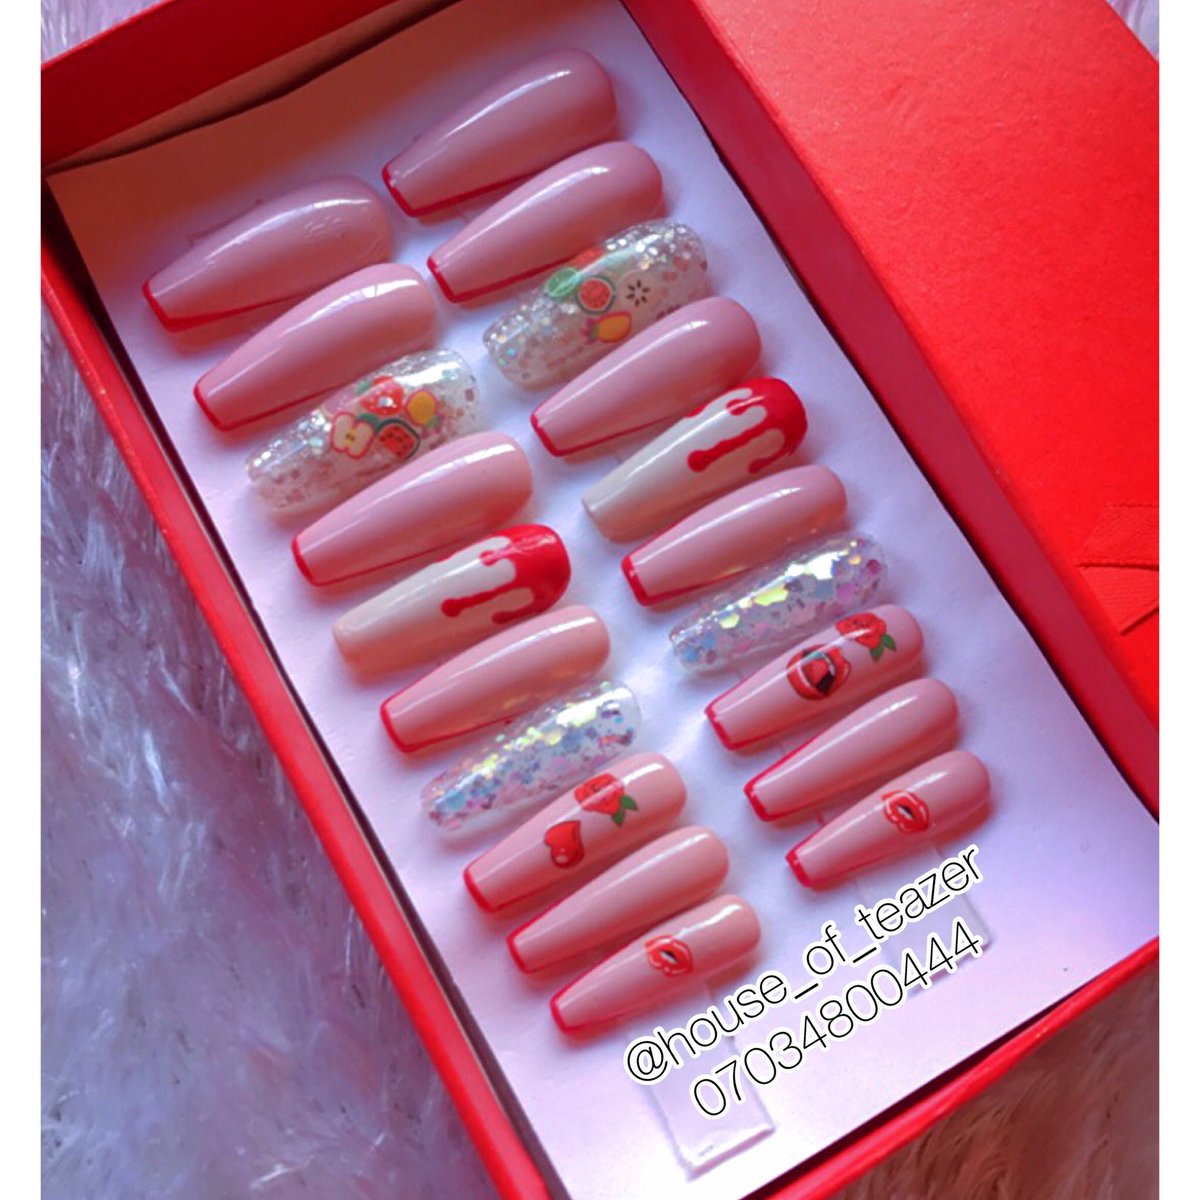 RETWEET PLS🙏
Pls help me get this nailset to the owner 🥰🙏. 
It’s a 20-in-1 set.(all sizes)
Made with Acrylic and Gel polish.
Highly reusable and it comes with full application kits. 
Price: 7k
Pls help retweet🙏🙏🙏